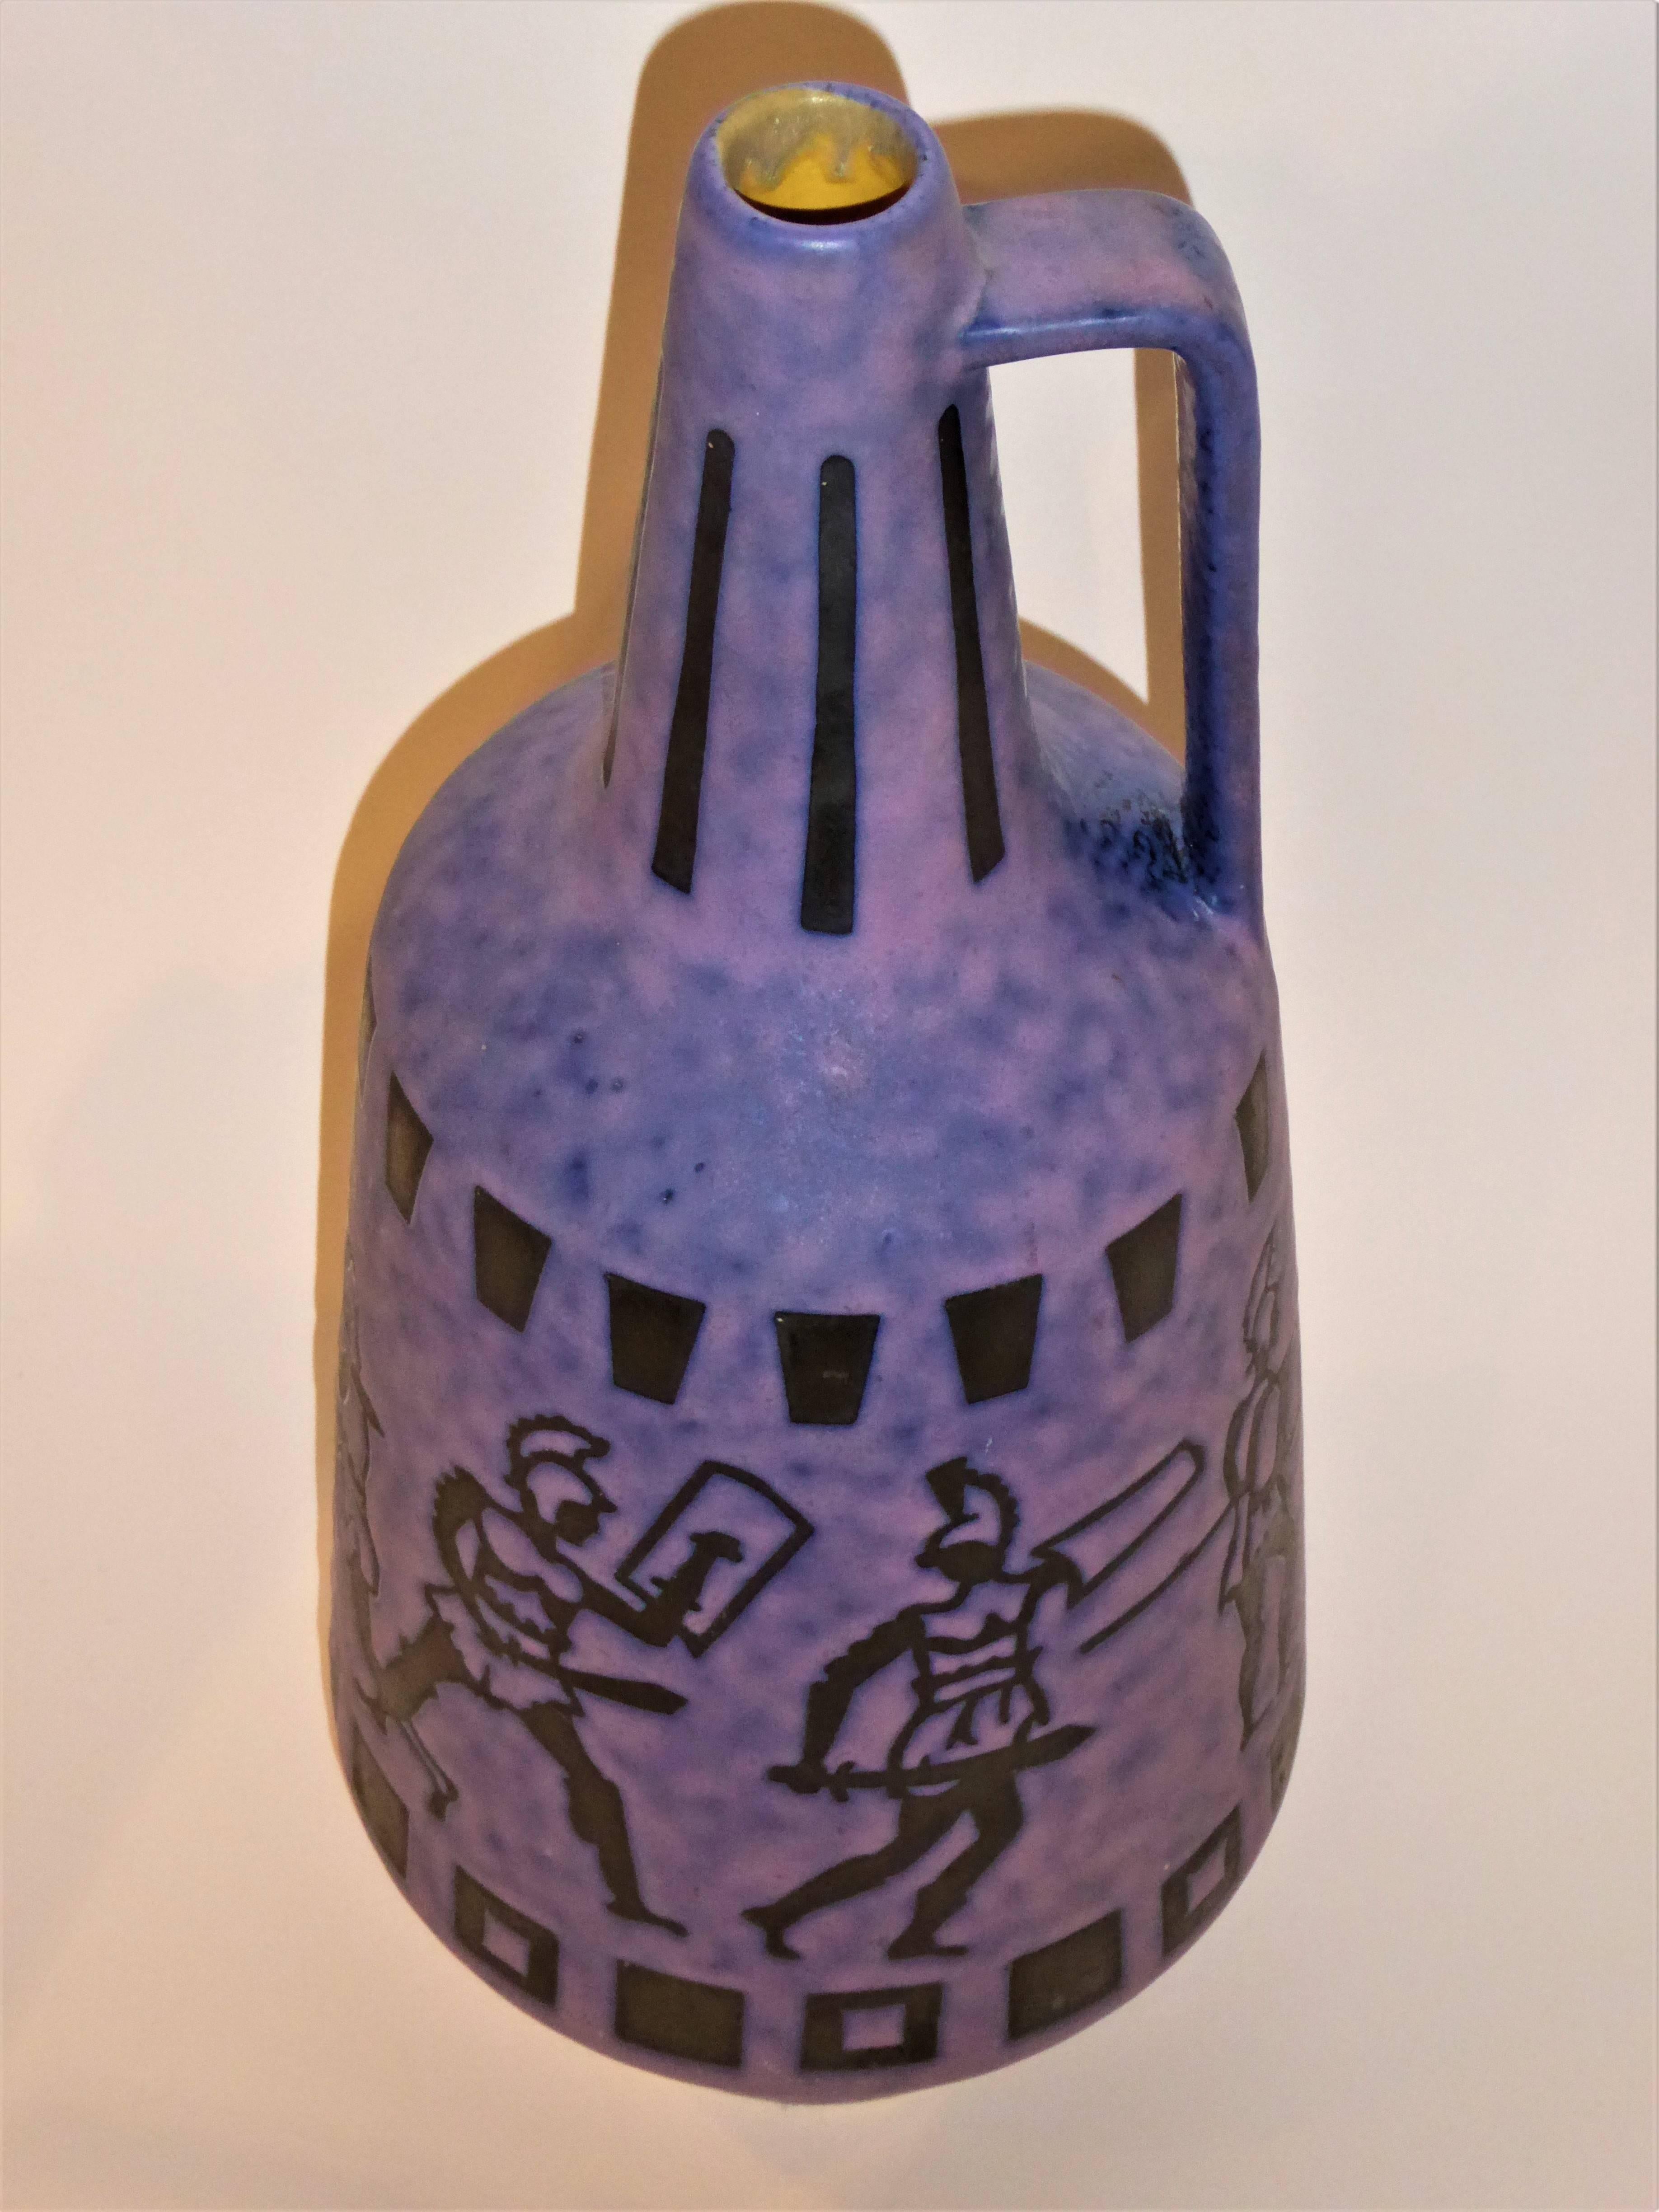 A 1960s midcentury tall vase ewer or krug in a mottled matte purple lava glaze with Roman Greco age fighting warriors depicted. Very Ceramano in design. Jopeko Keramik was founded in 1948 by Johann Peter Korzilius, hence the name, the first two